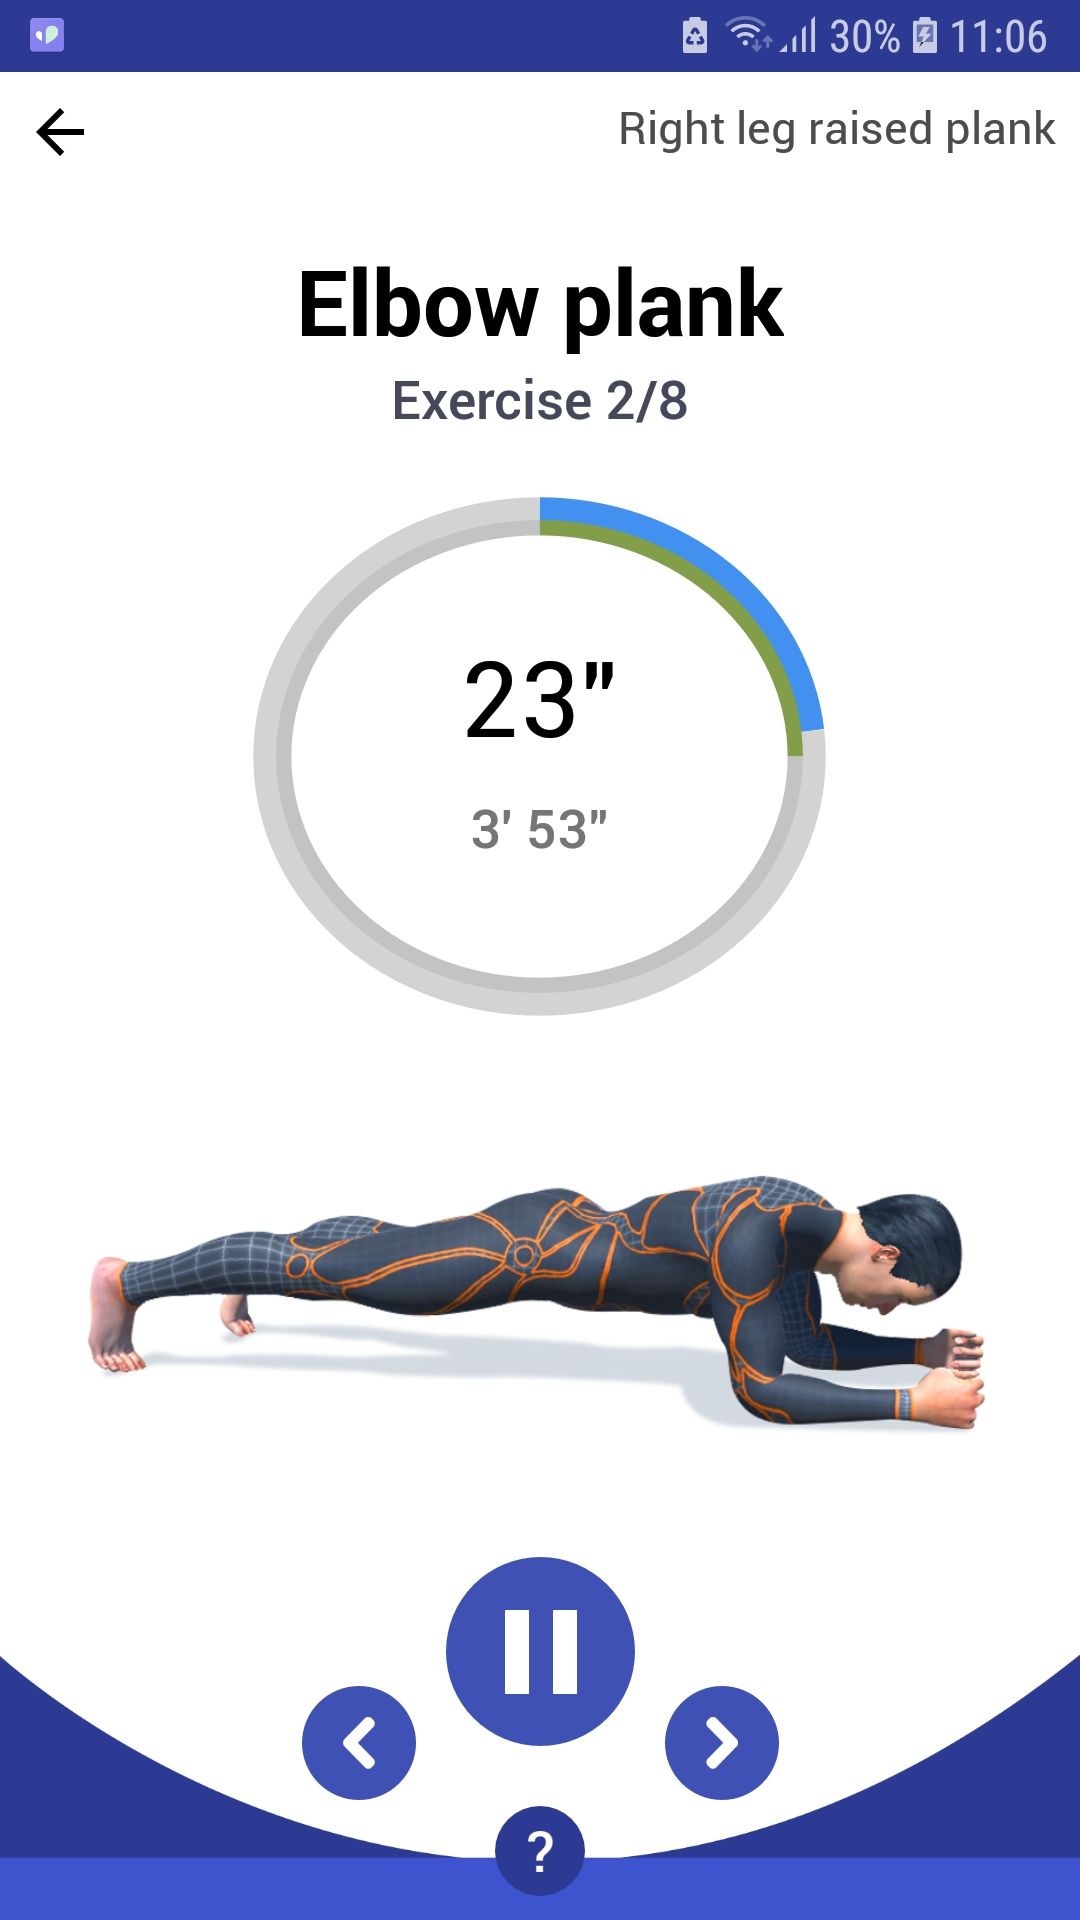 5 Minute Plank mobile exercise app elbow plank